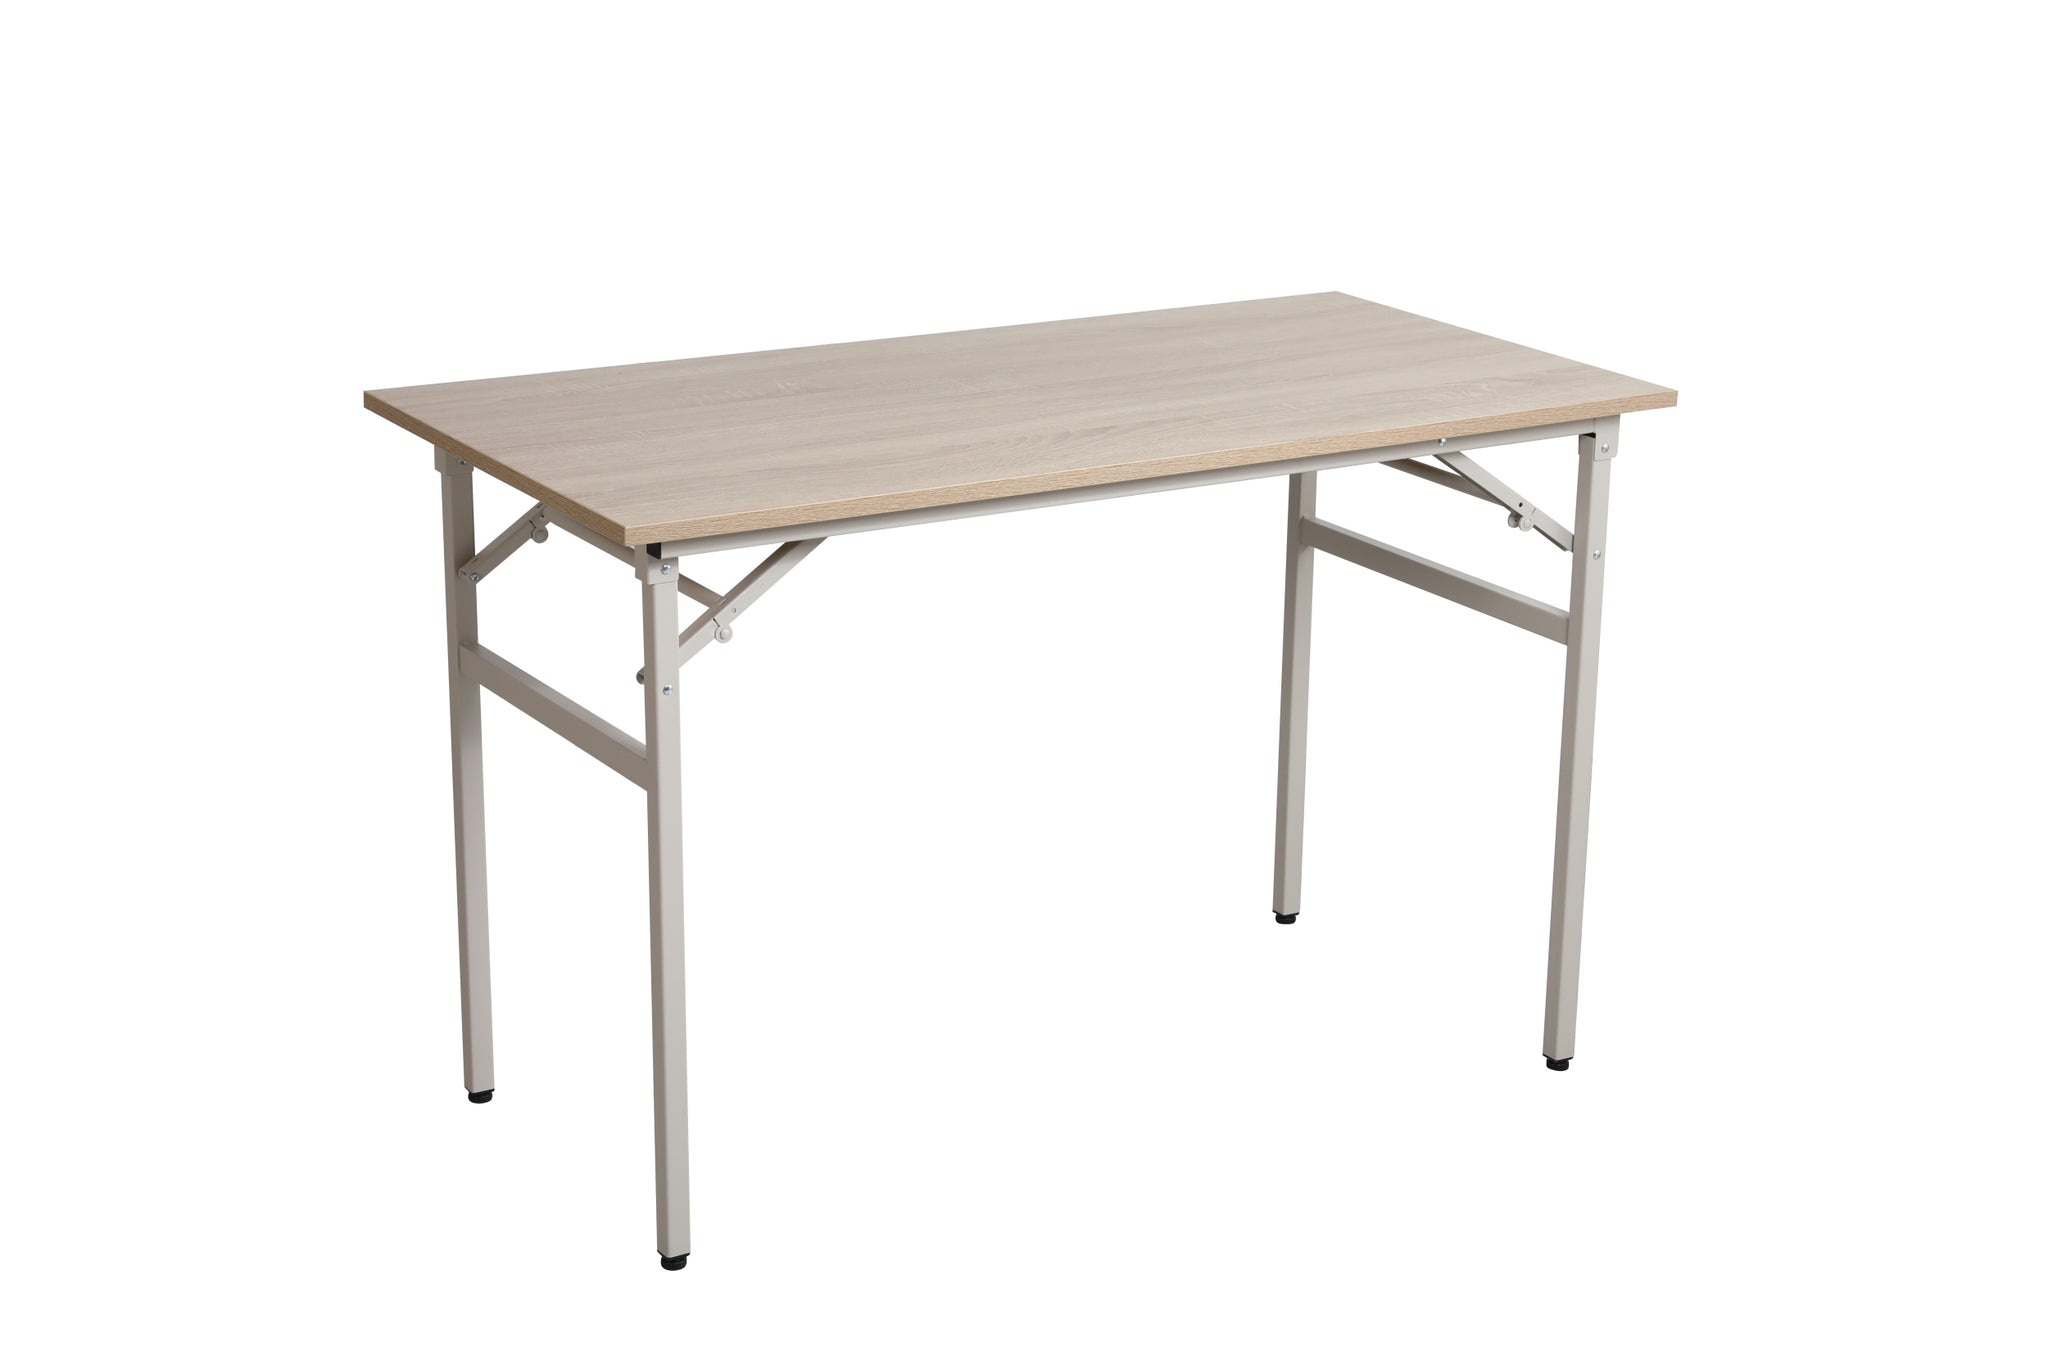 Folding table desk 31.5x15.7 inches computer beige-mdf+steel